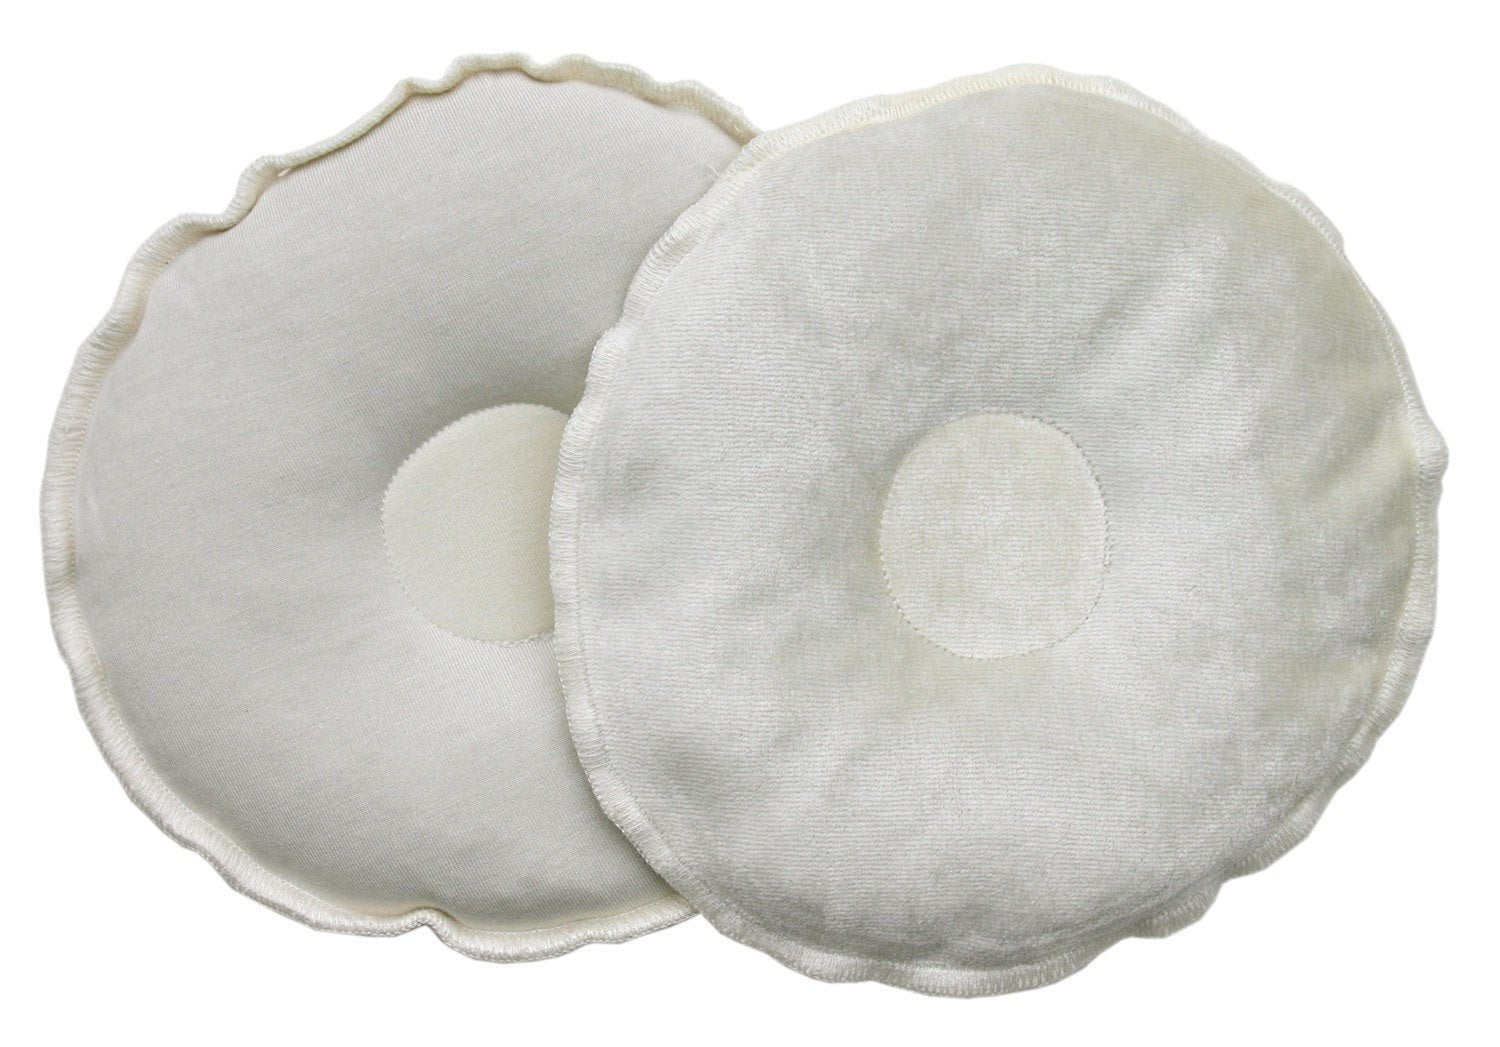 Reusable Breast Therapy Pack, Breast Ice Packs, Breastfeeding